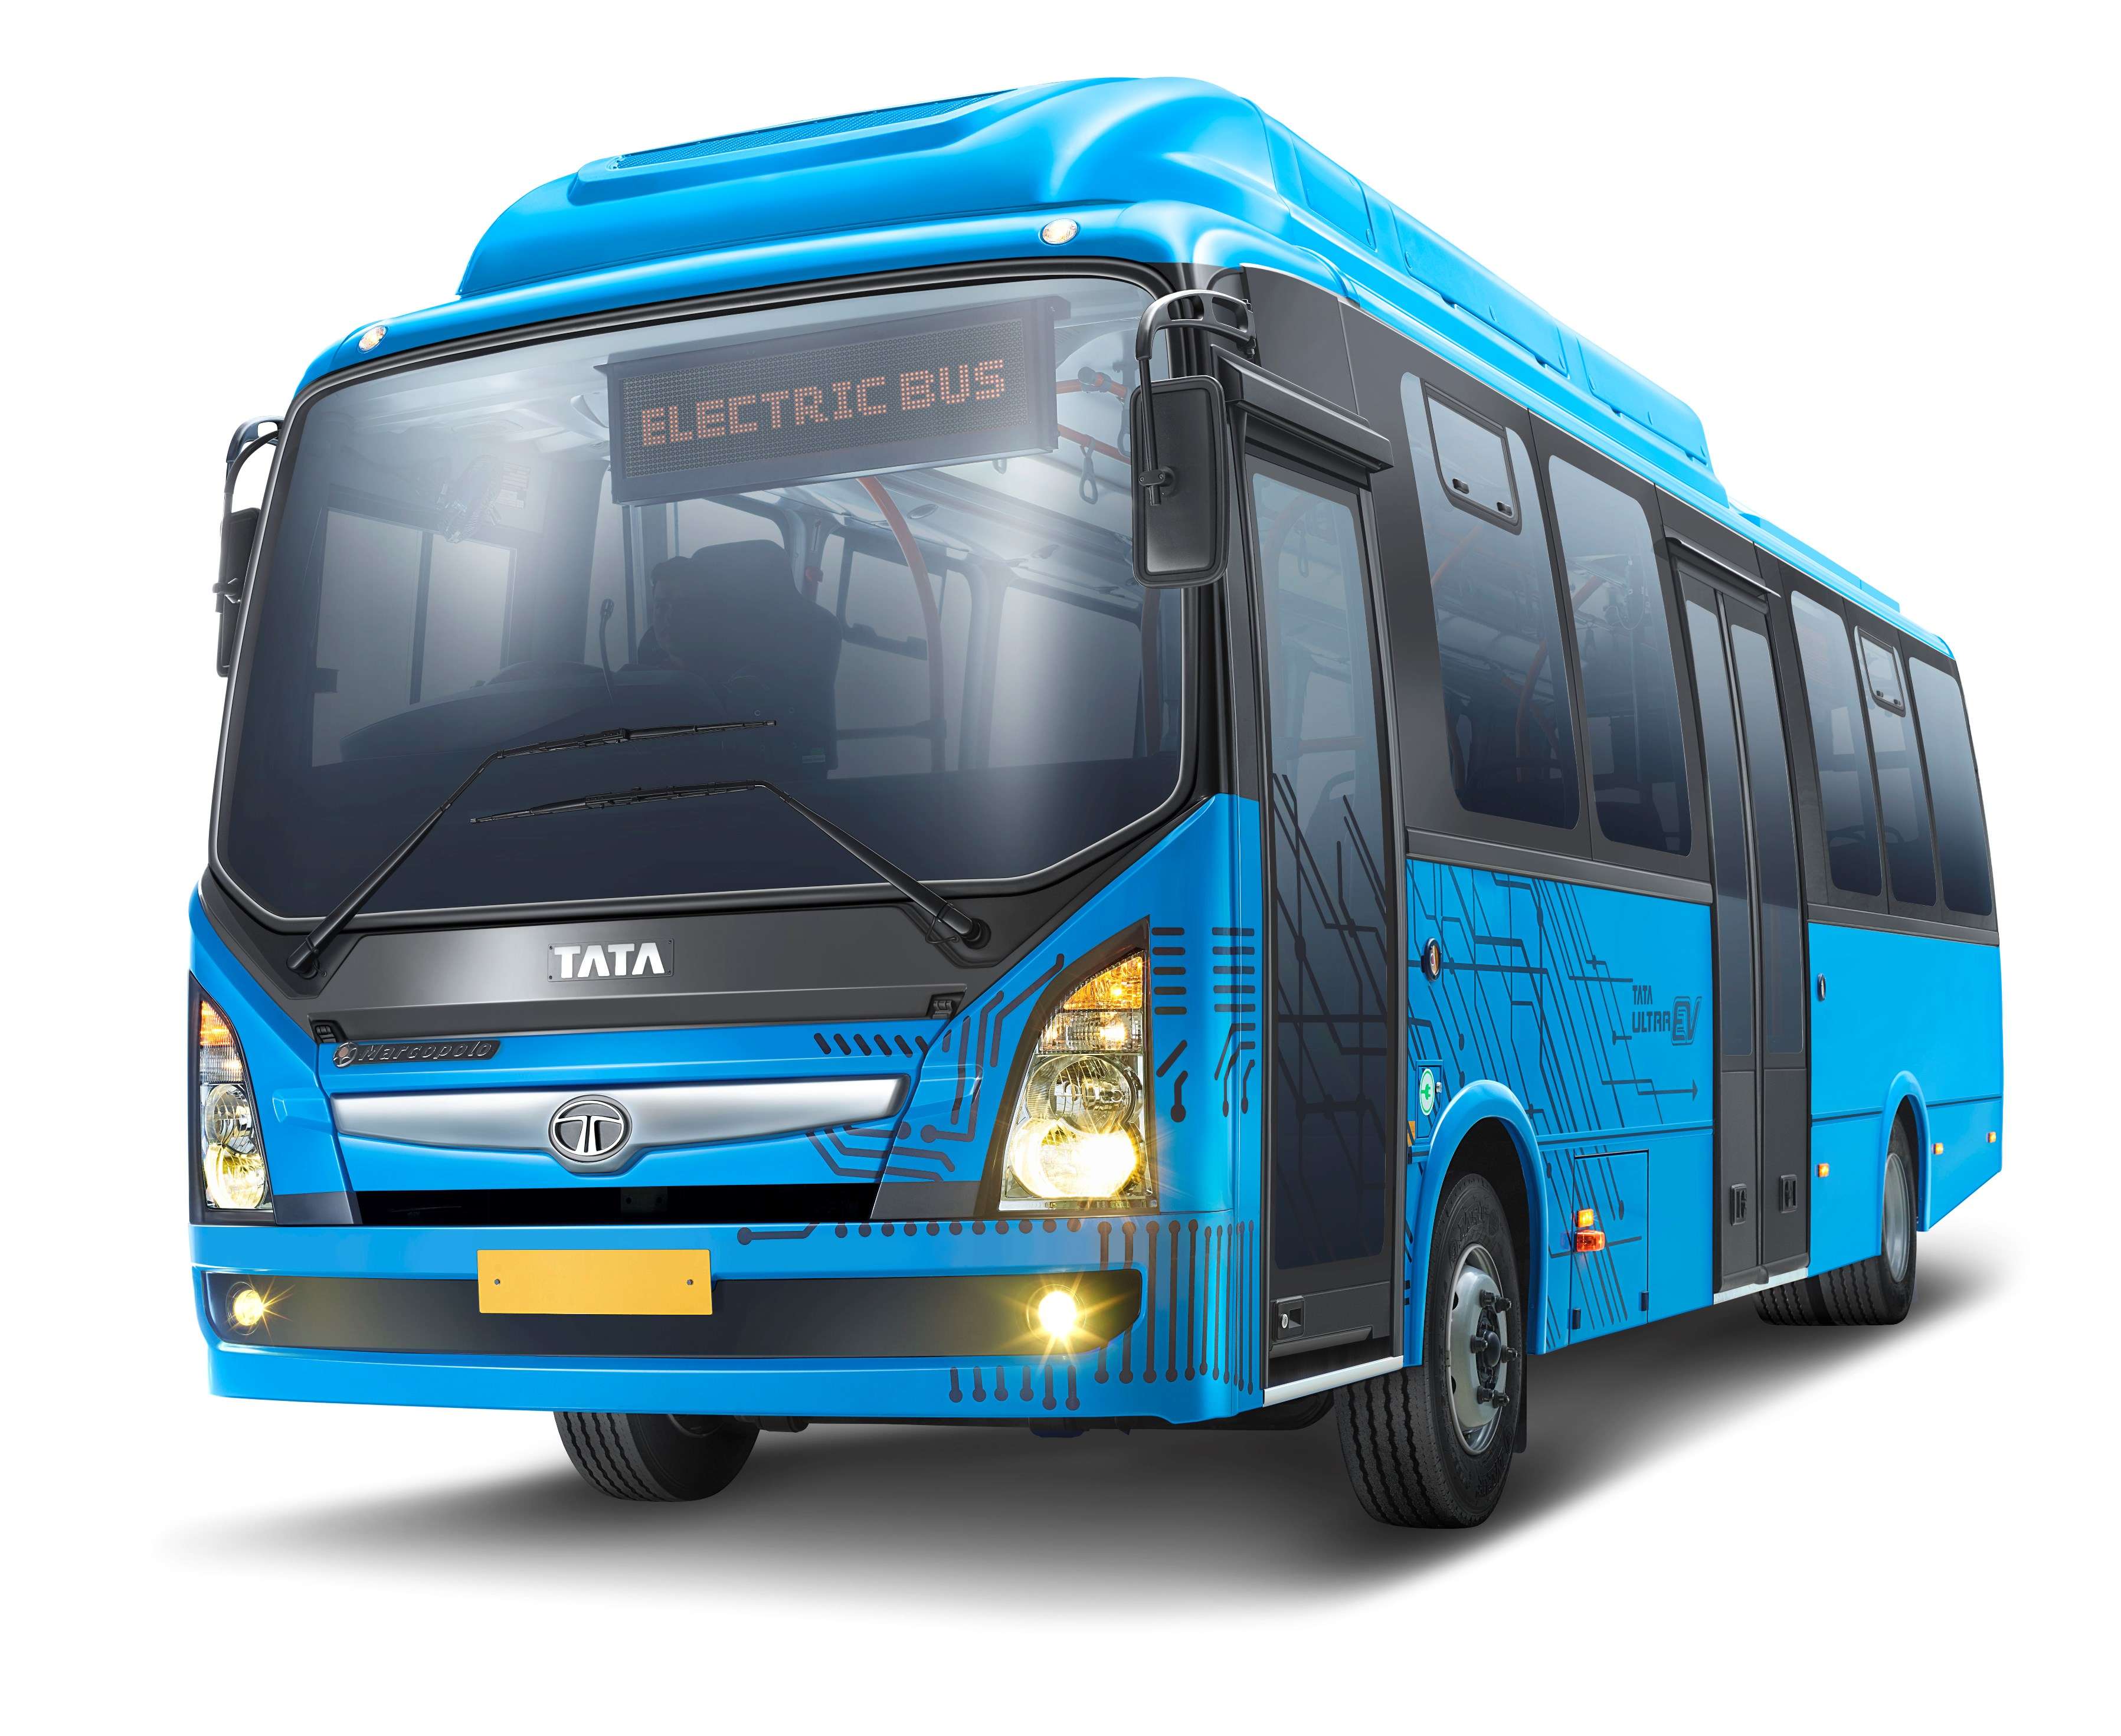 The new Tata Ultra Urban 9/9 electric AC buses will ply in Ahmedabad's BRTS corridor.